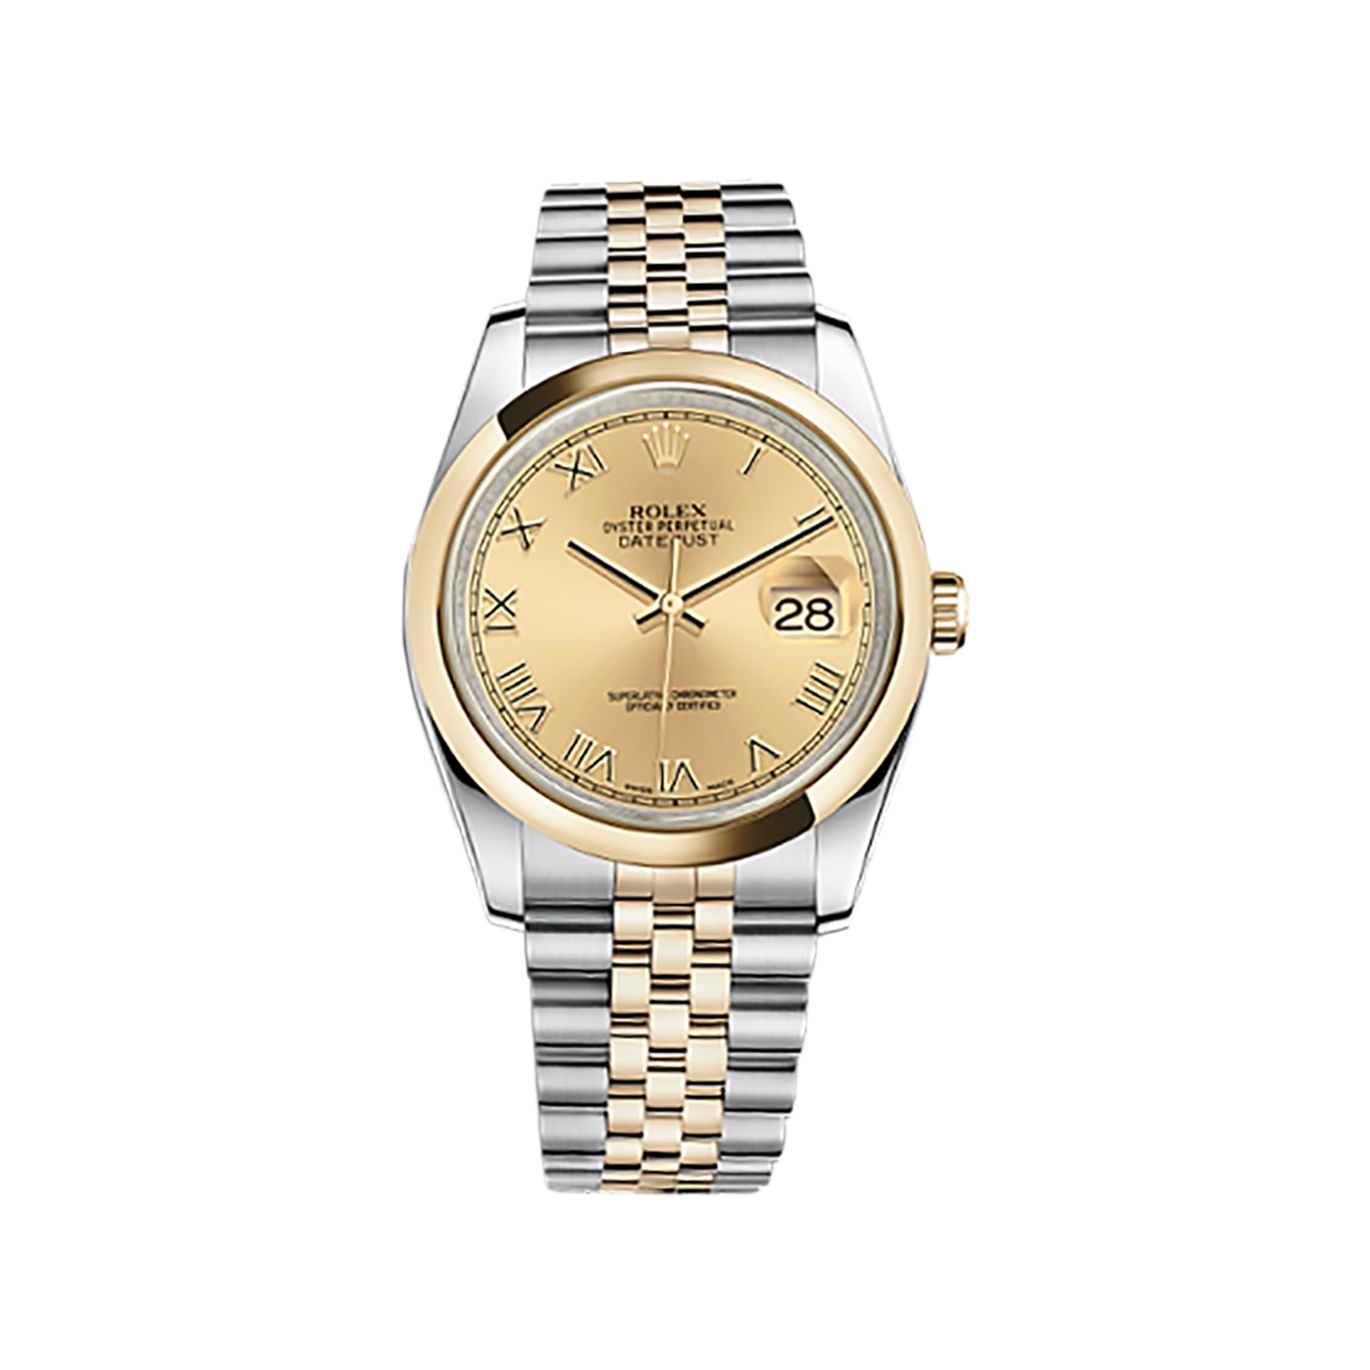 Datejust 36 116203 Gold & Stainless Steel Watch (Champagne) - Click Image to Close